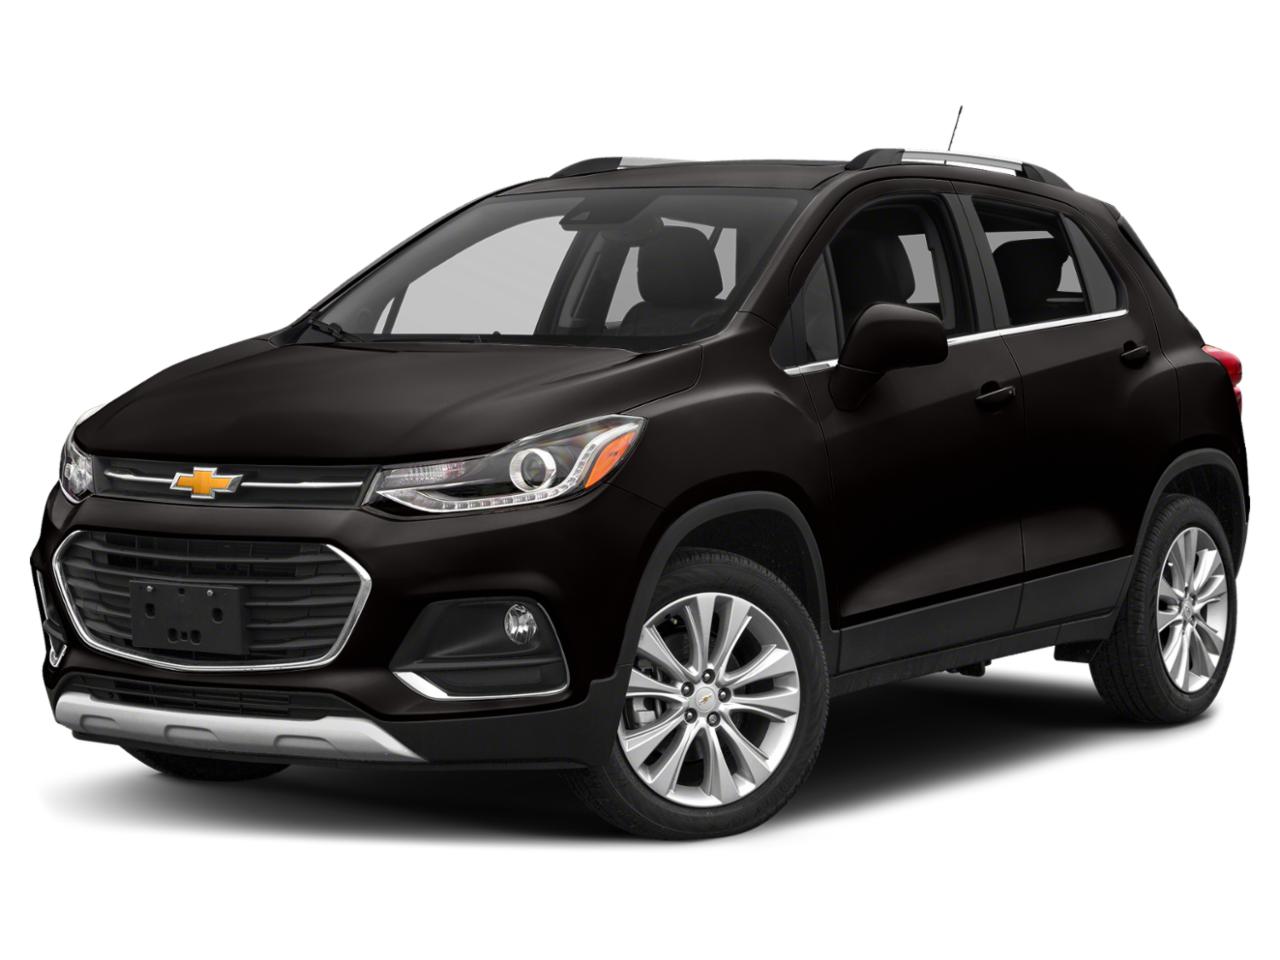 2018 chevy trax paint code location